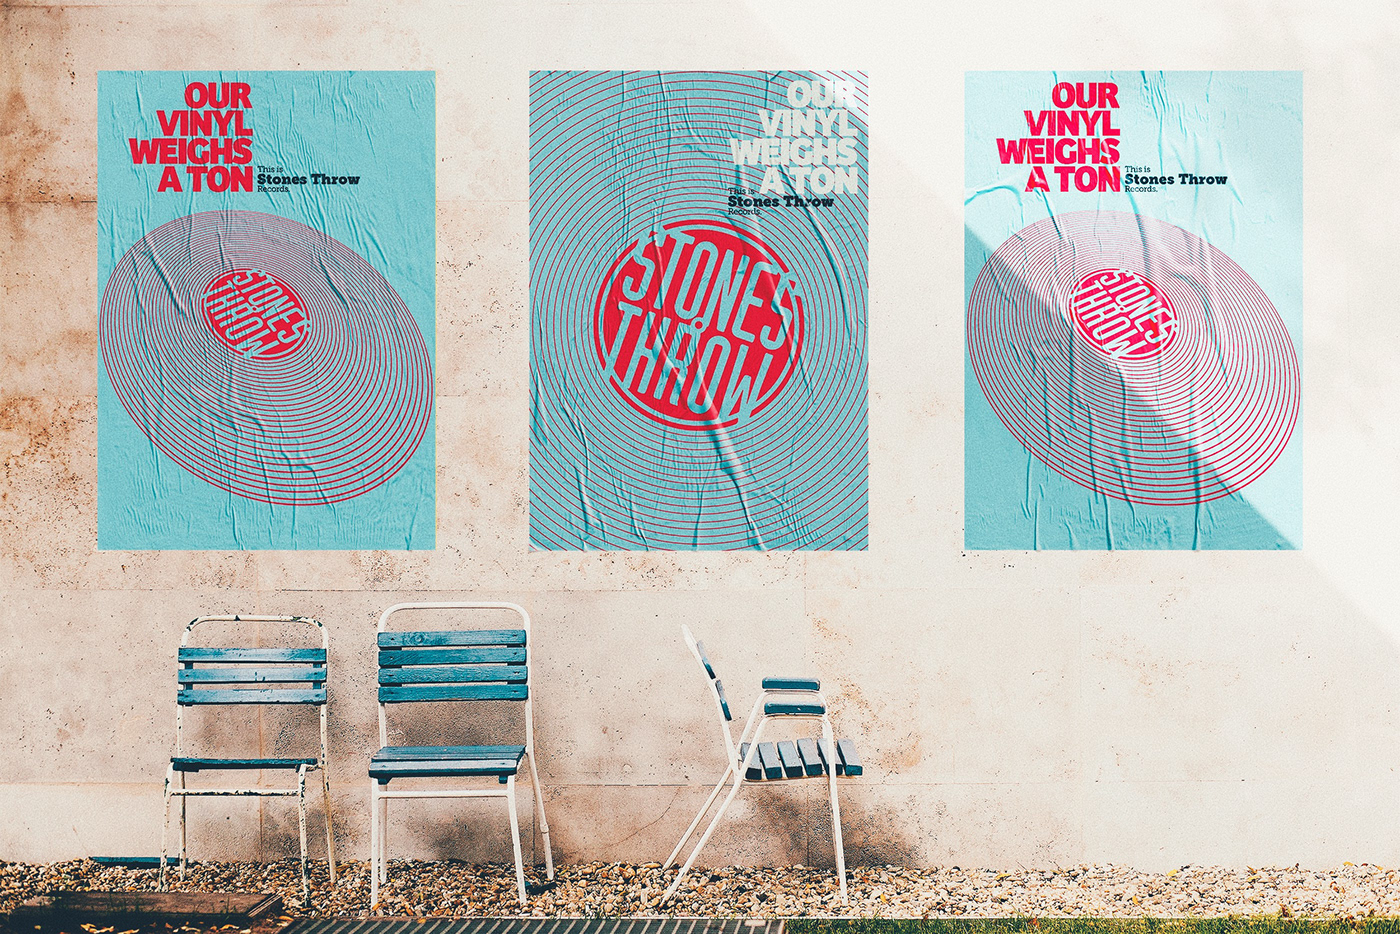 Our Vinyl Weighs A Ton This Is Stones Throw Records On Behance